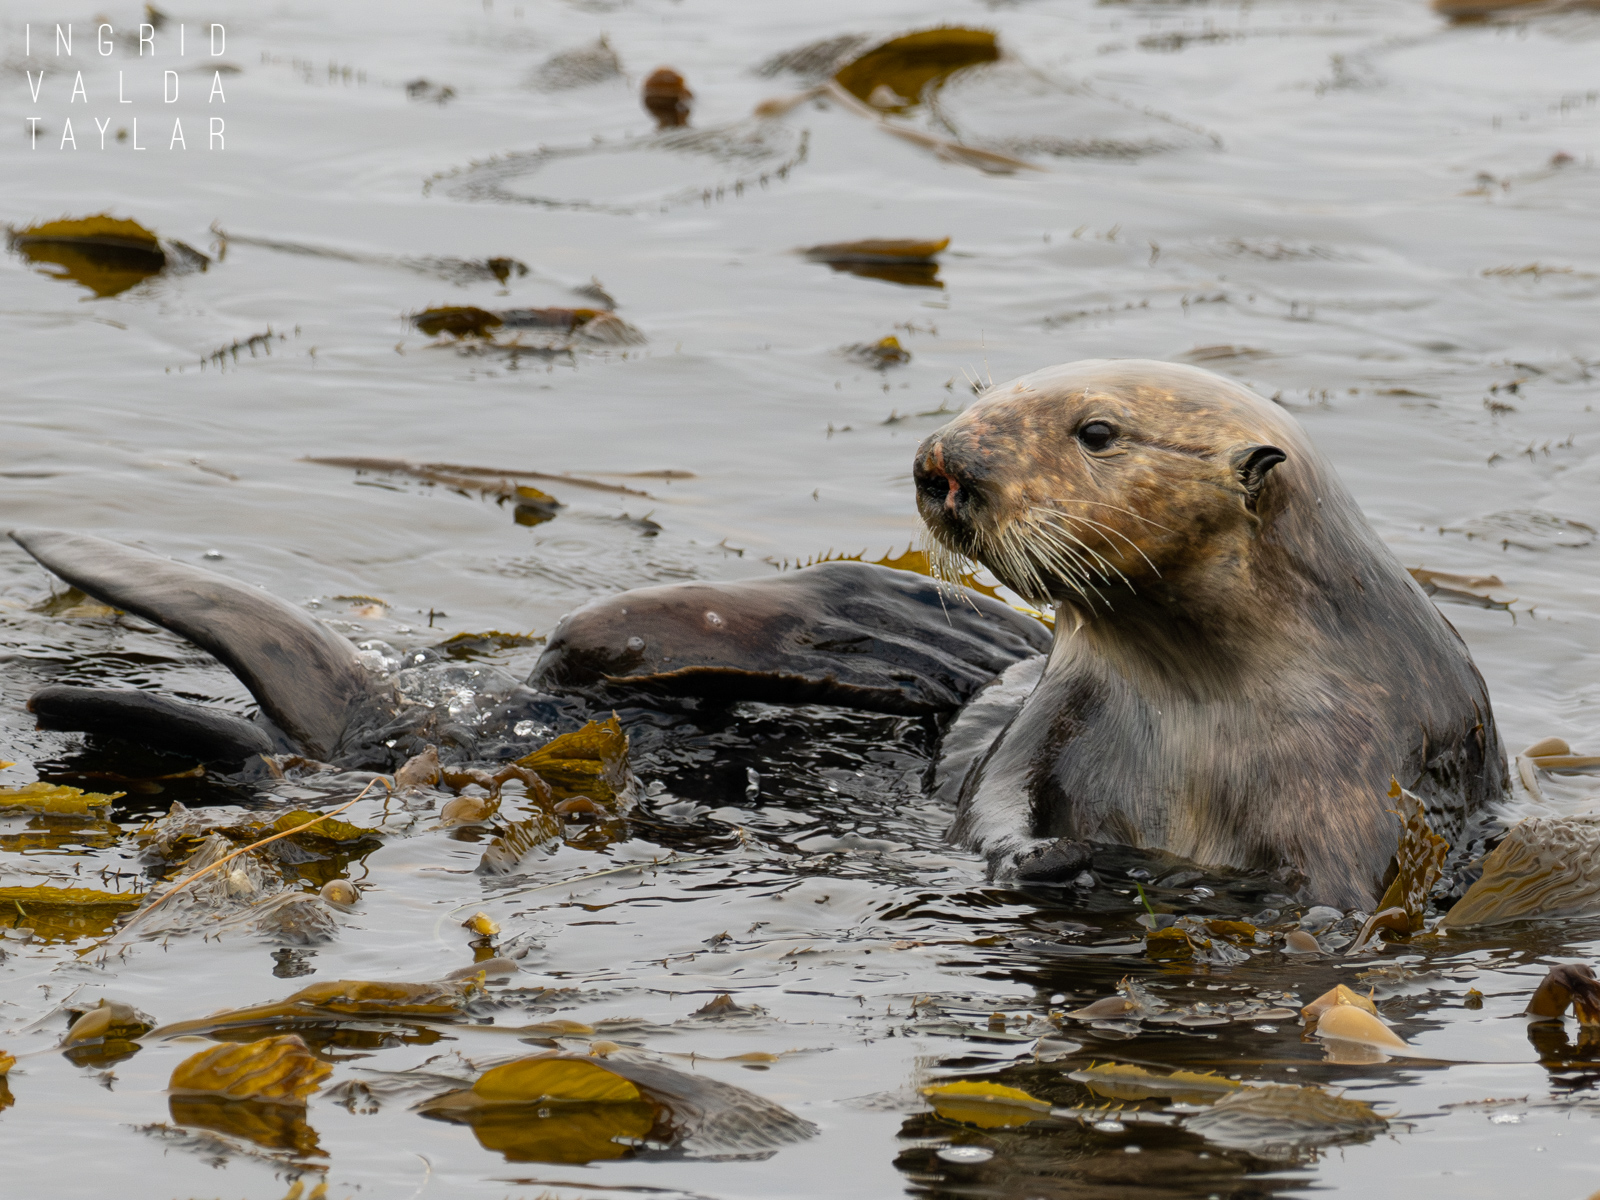 Southern Sea Otter Female in Monterey Kelp Bed